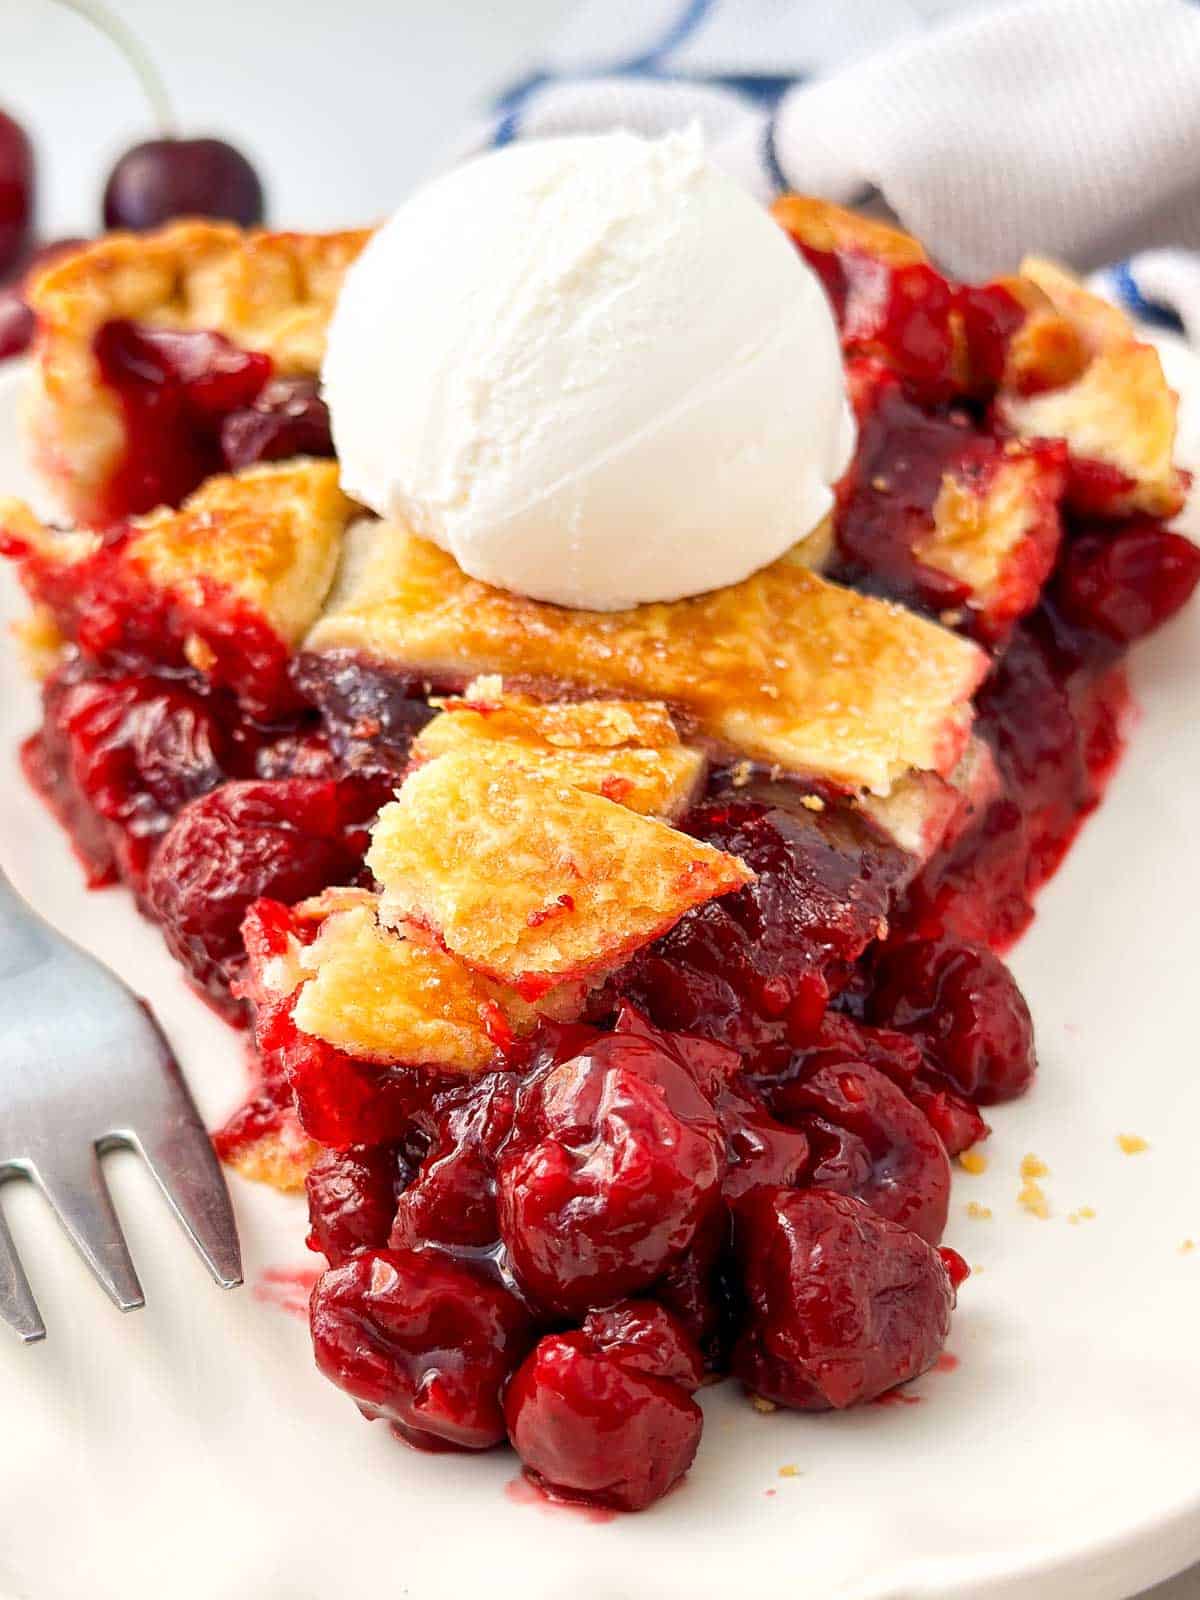 frontal close p view of cherry pie slice with a scoop of vanilla ice cream